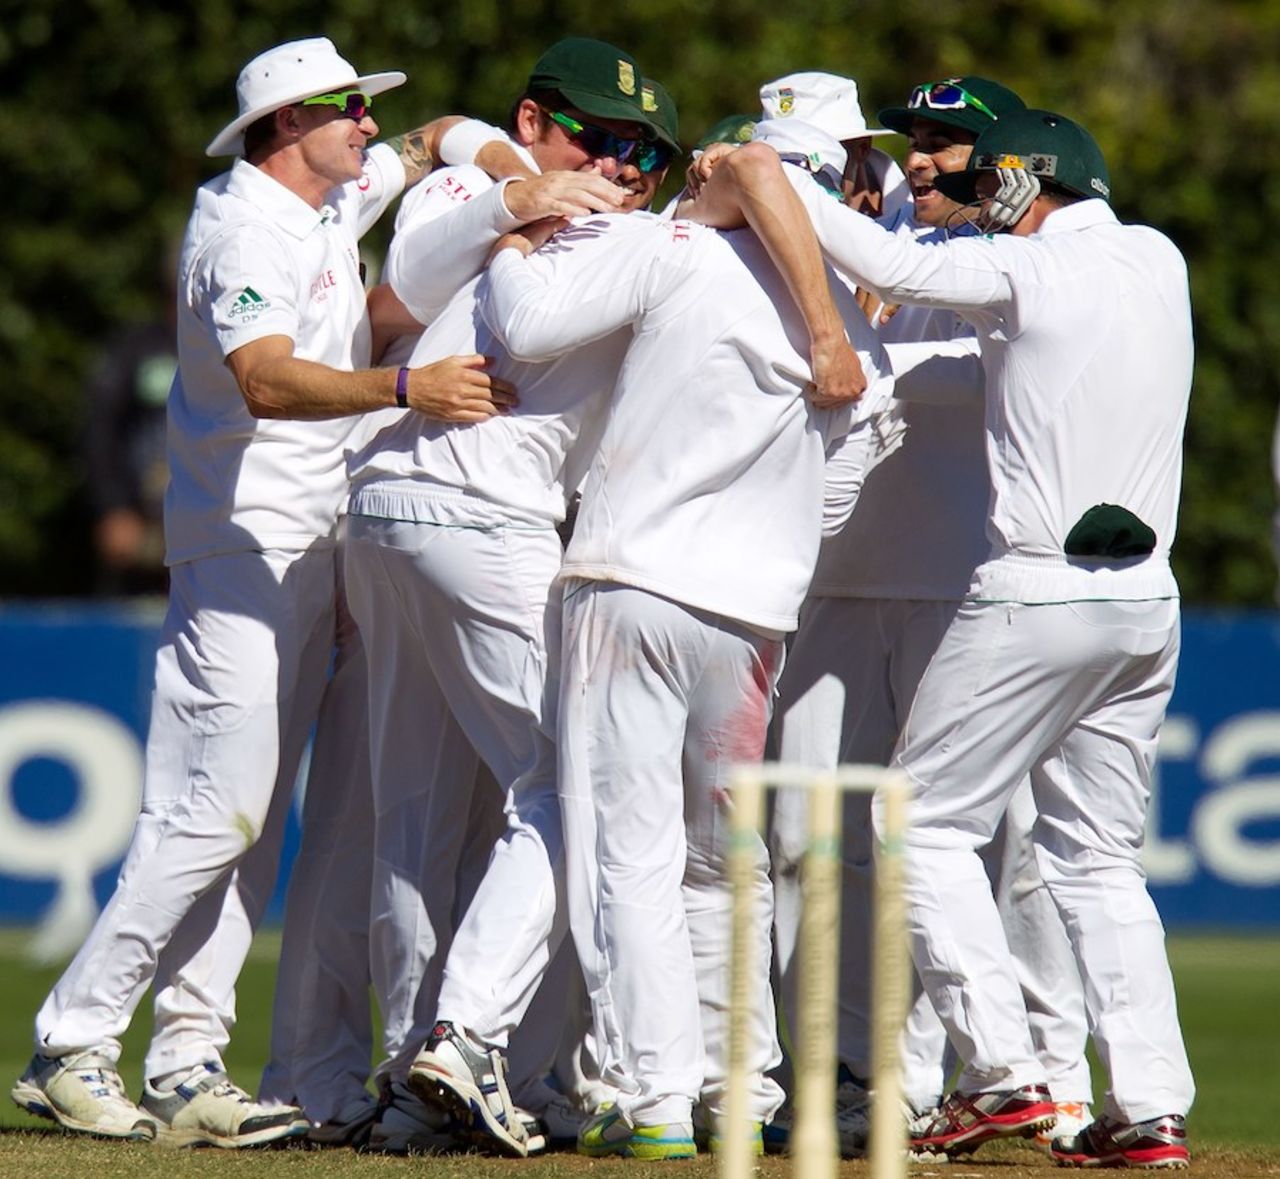 Morne Morkel is mobbed by his team-mates, New Zealand v South Africa, 3rd Test, Wellington, 5th day, March 27, 2012